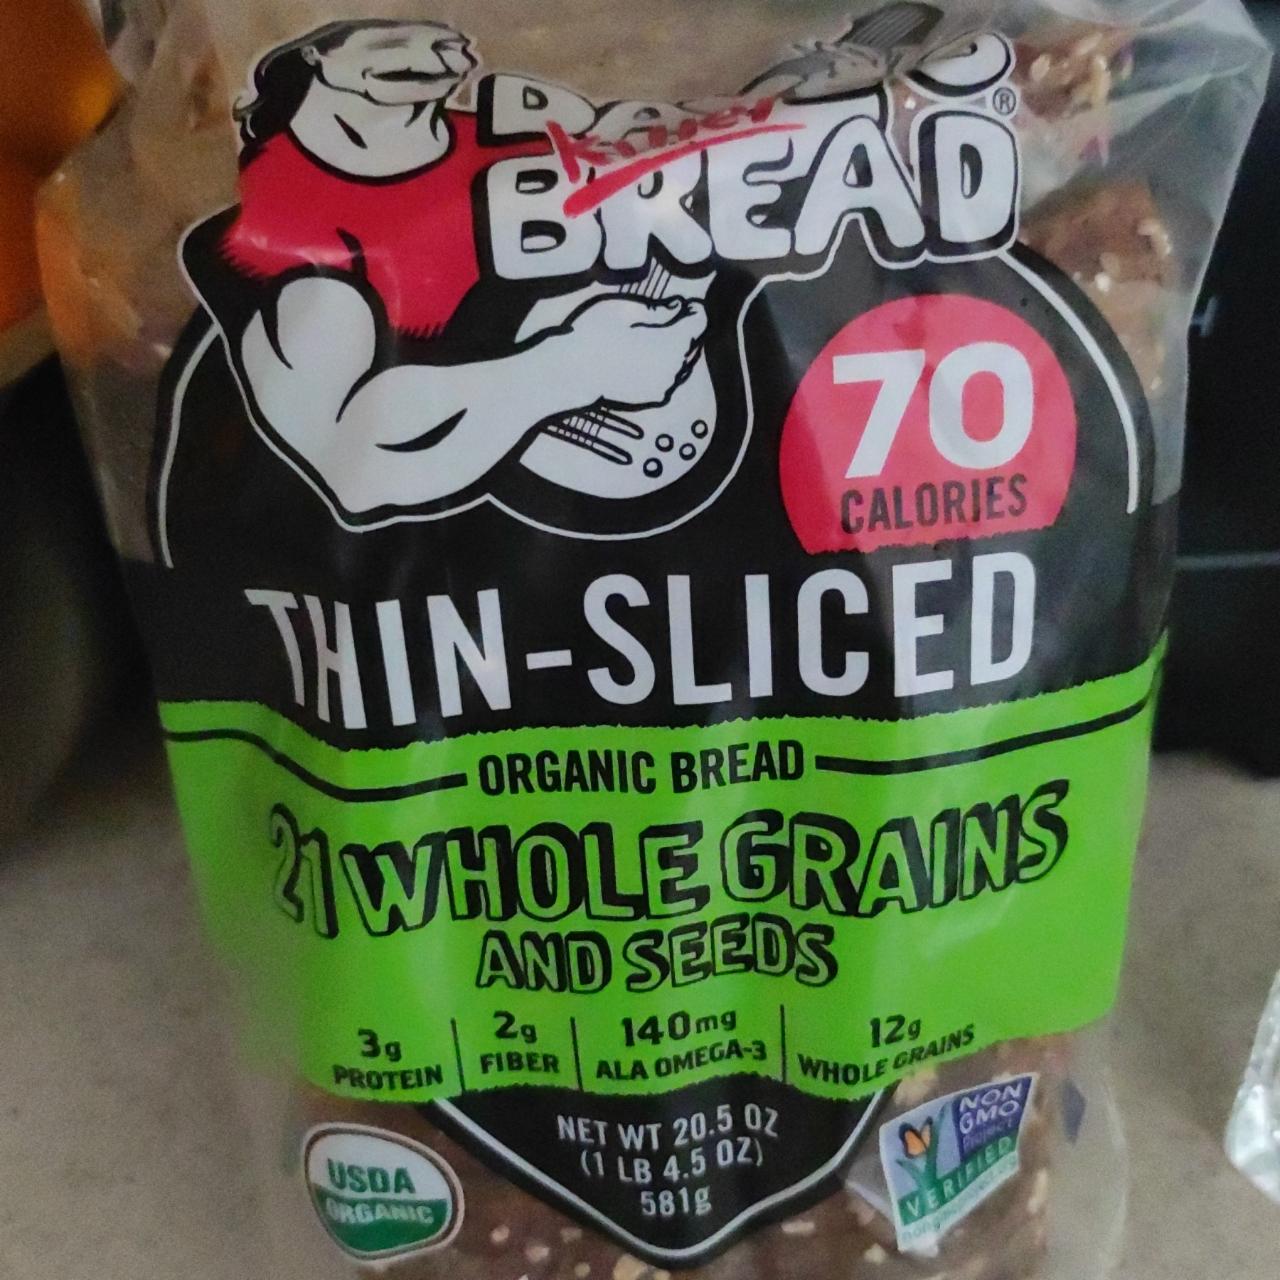 Fotografie - Organic Bread 21 Whole Grains and Seeds Thin-Sliced Dave's Killer